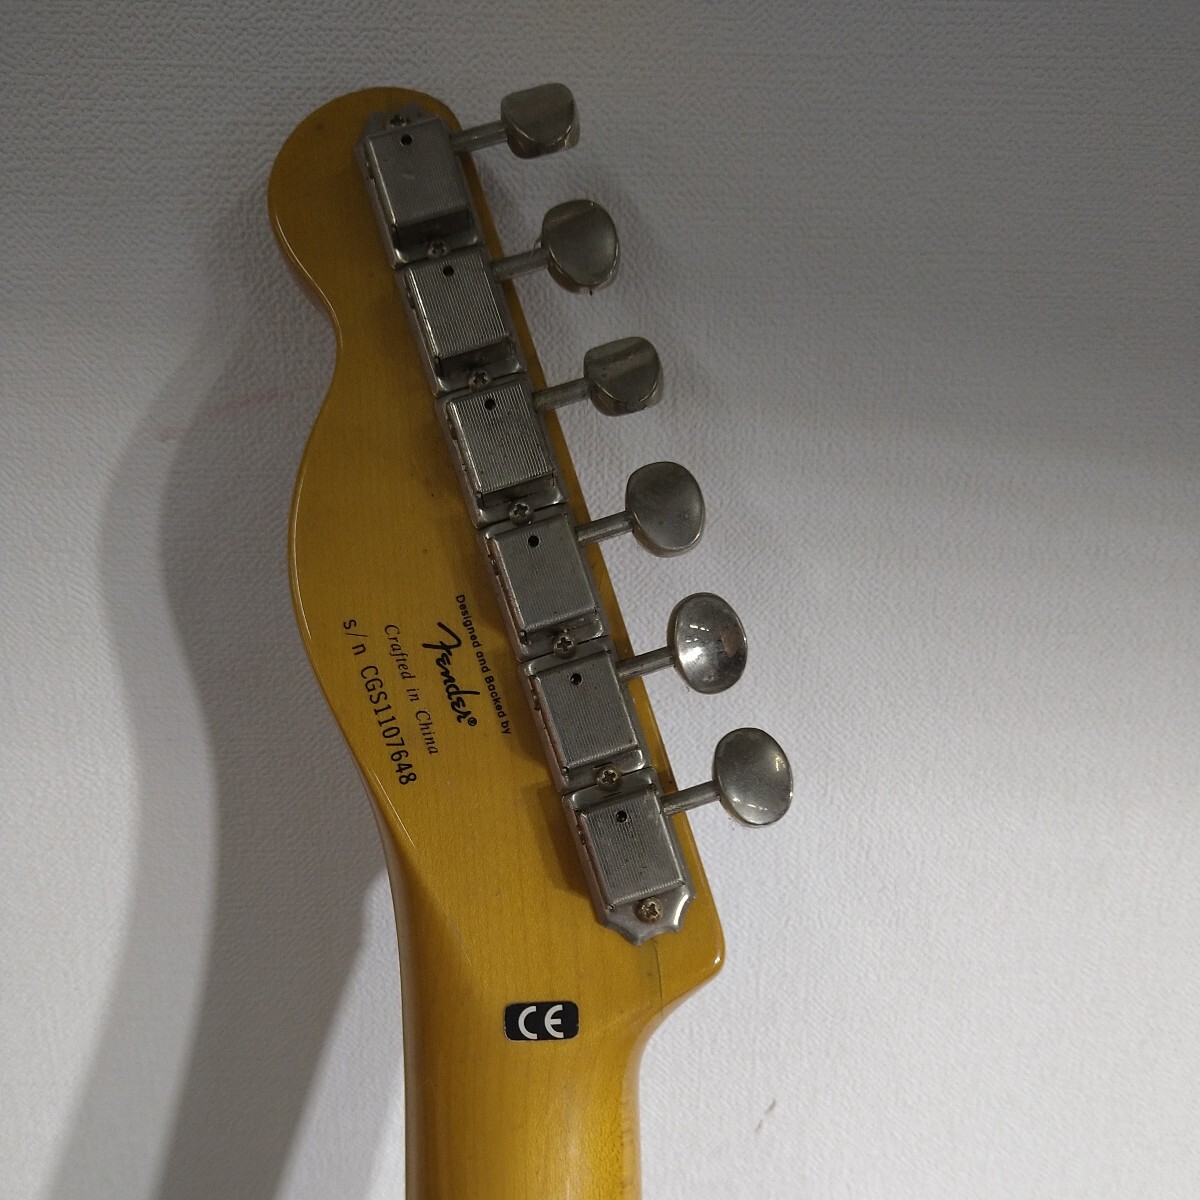 OS015.型番:Squier.0423. Squier by Fender .Telecaster .傷あり.ジャンク_画像7